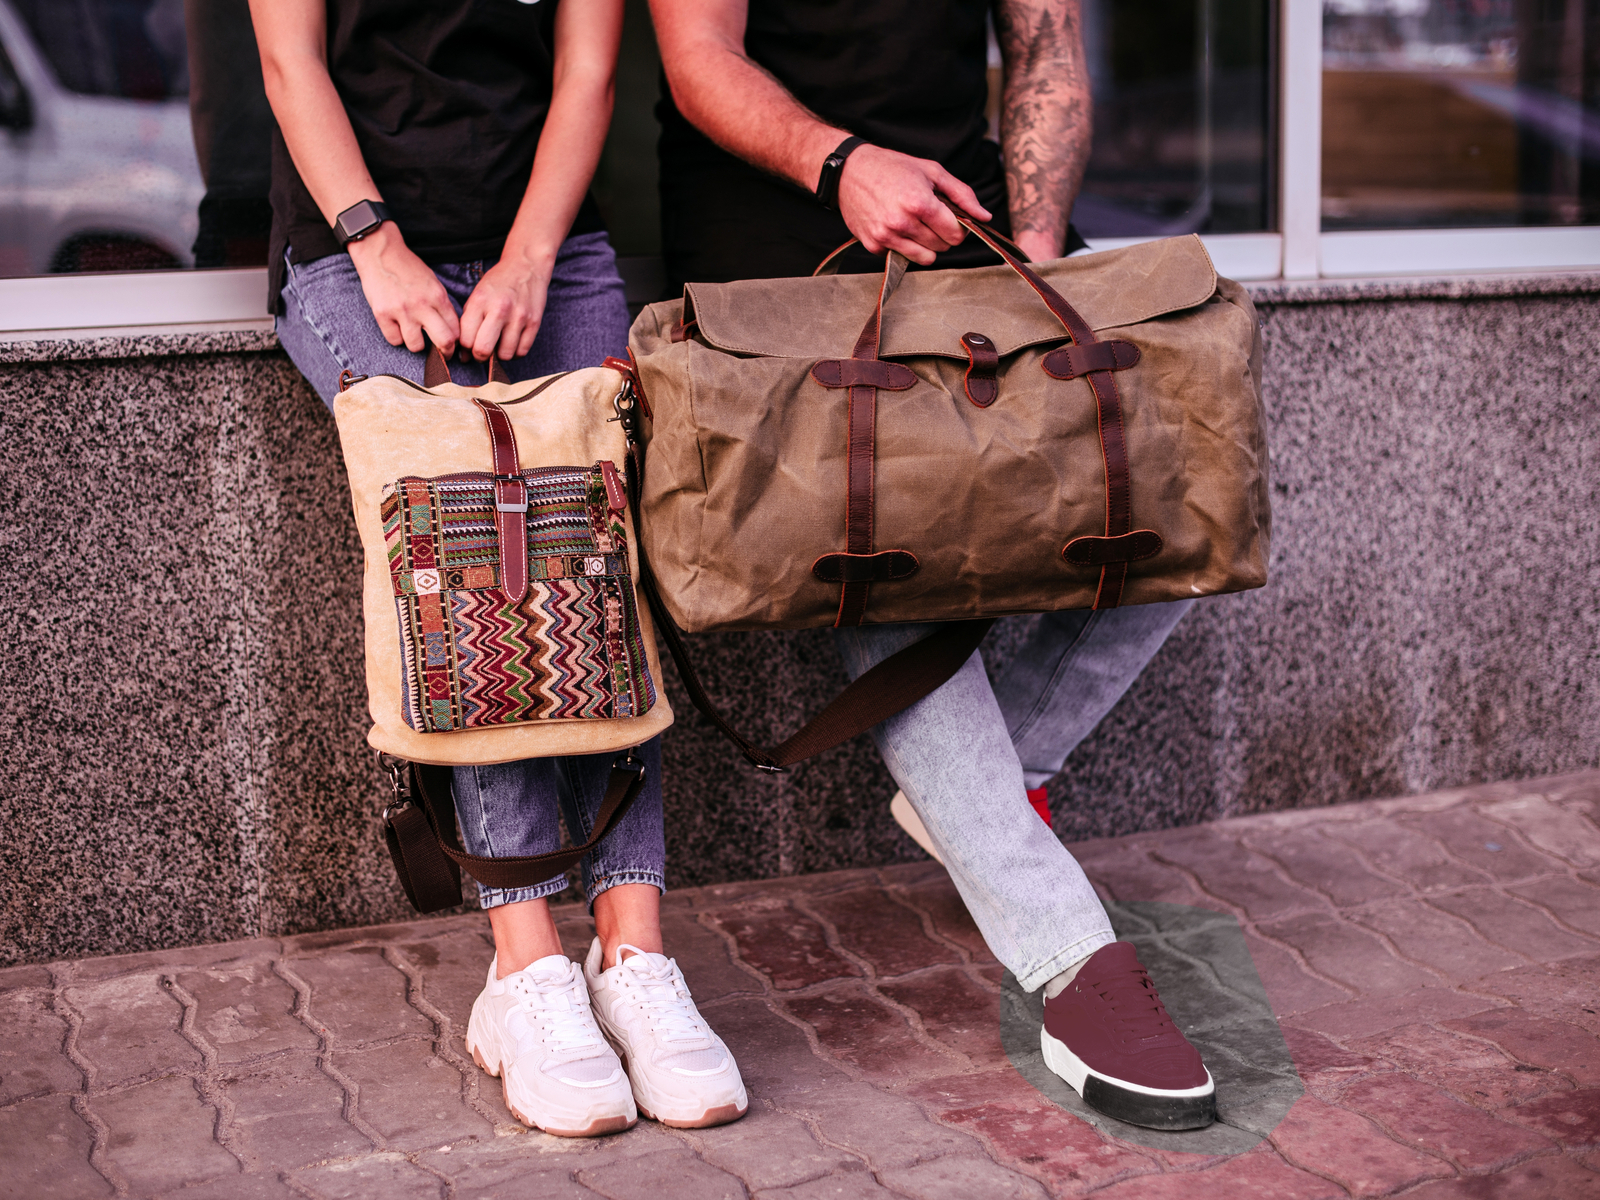 Man and woman holding the best men's leather weekender bags while standing waiting for a cab outside a hotel in a city